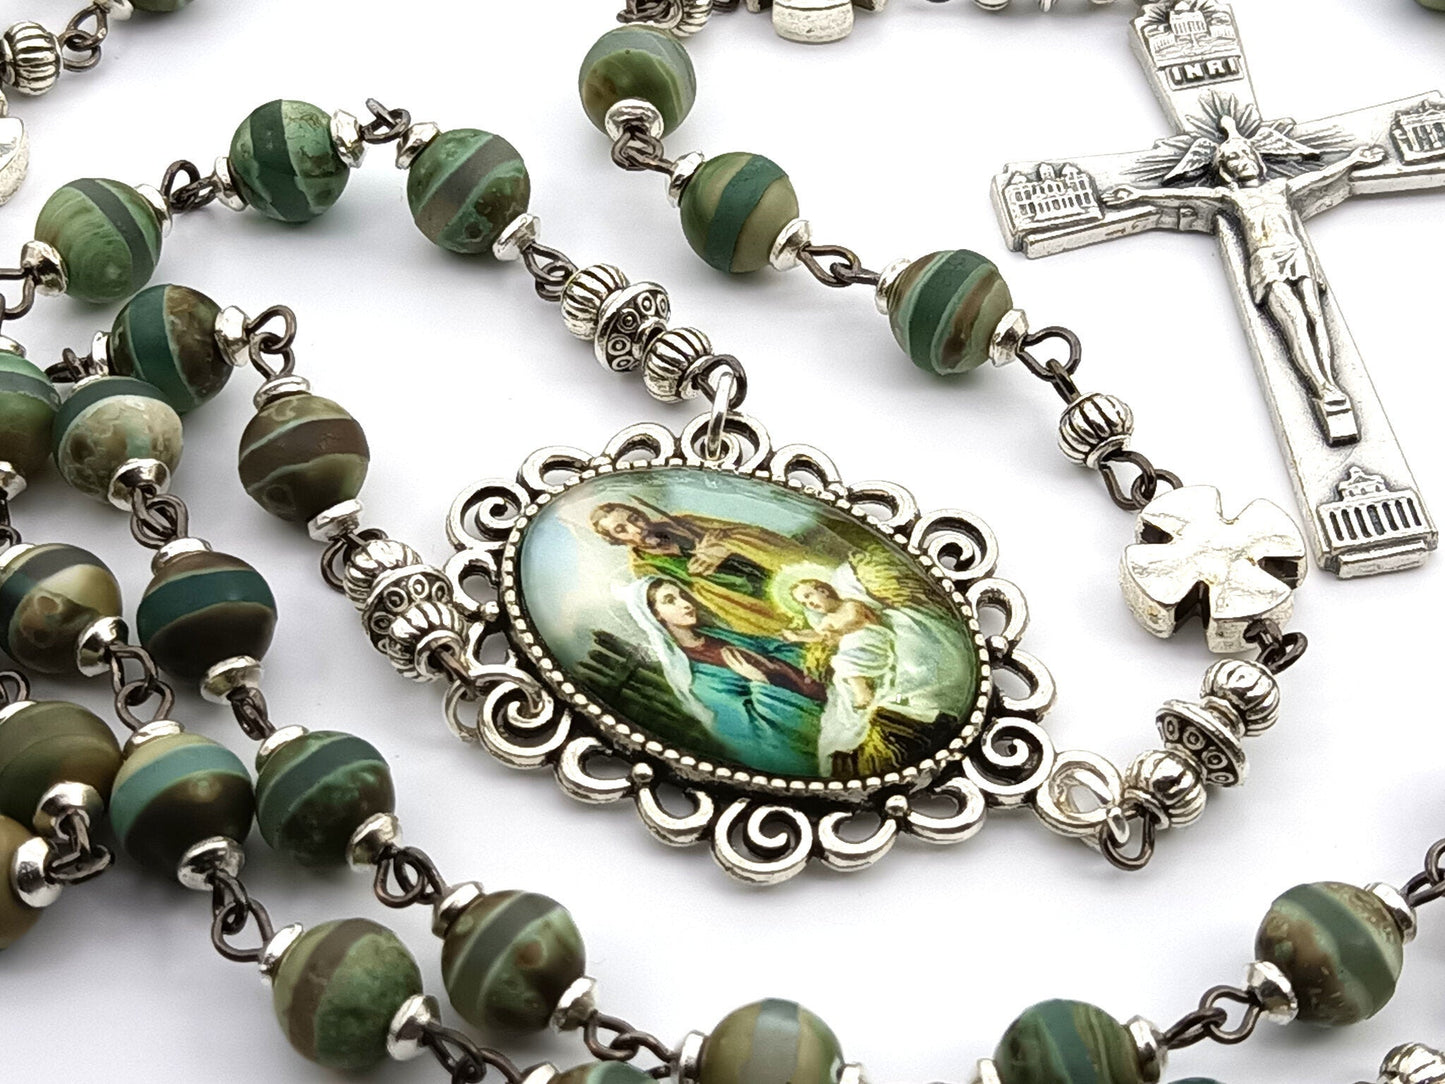 Holy Family unique rosary beads with green gemstone beads, silver cross pater beads, silver crucifix and picture centre medal. 